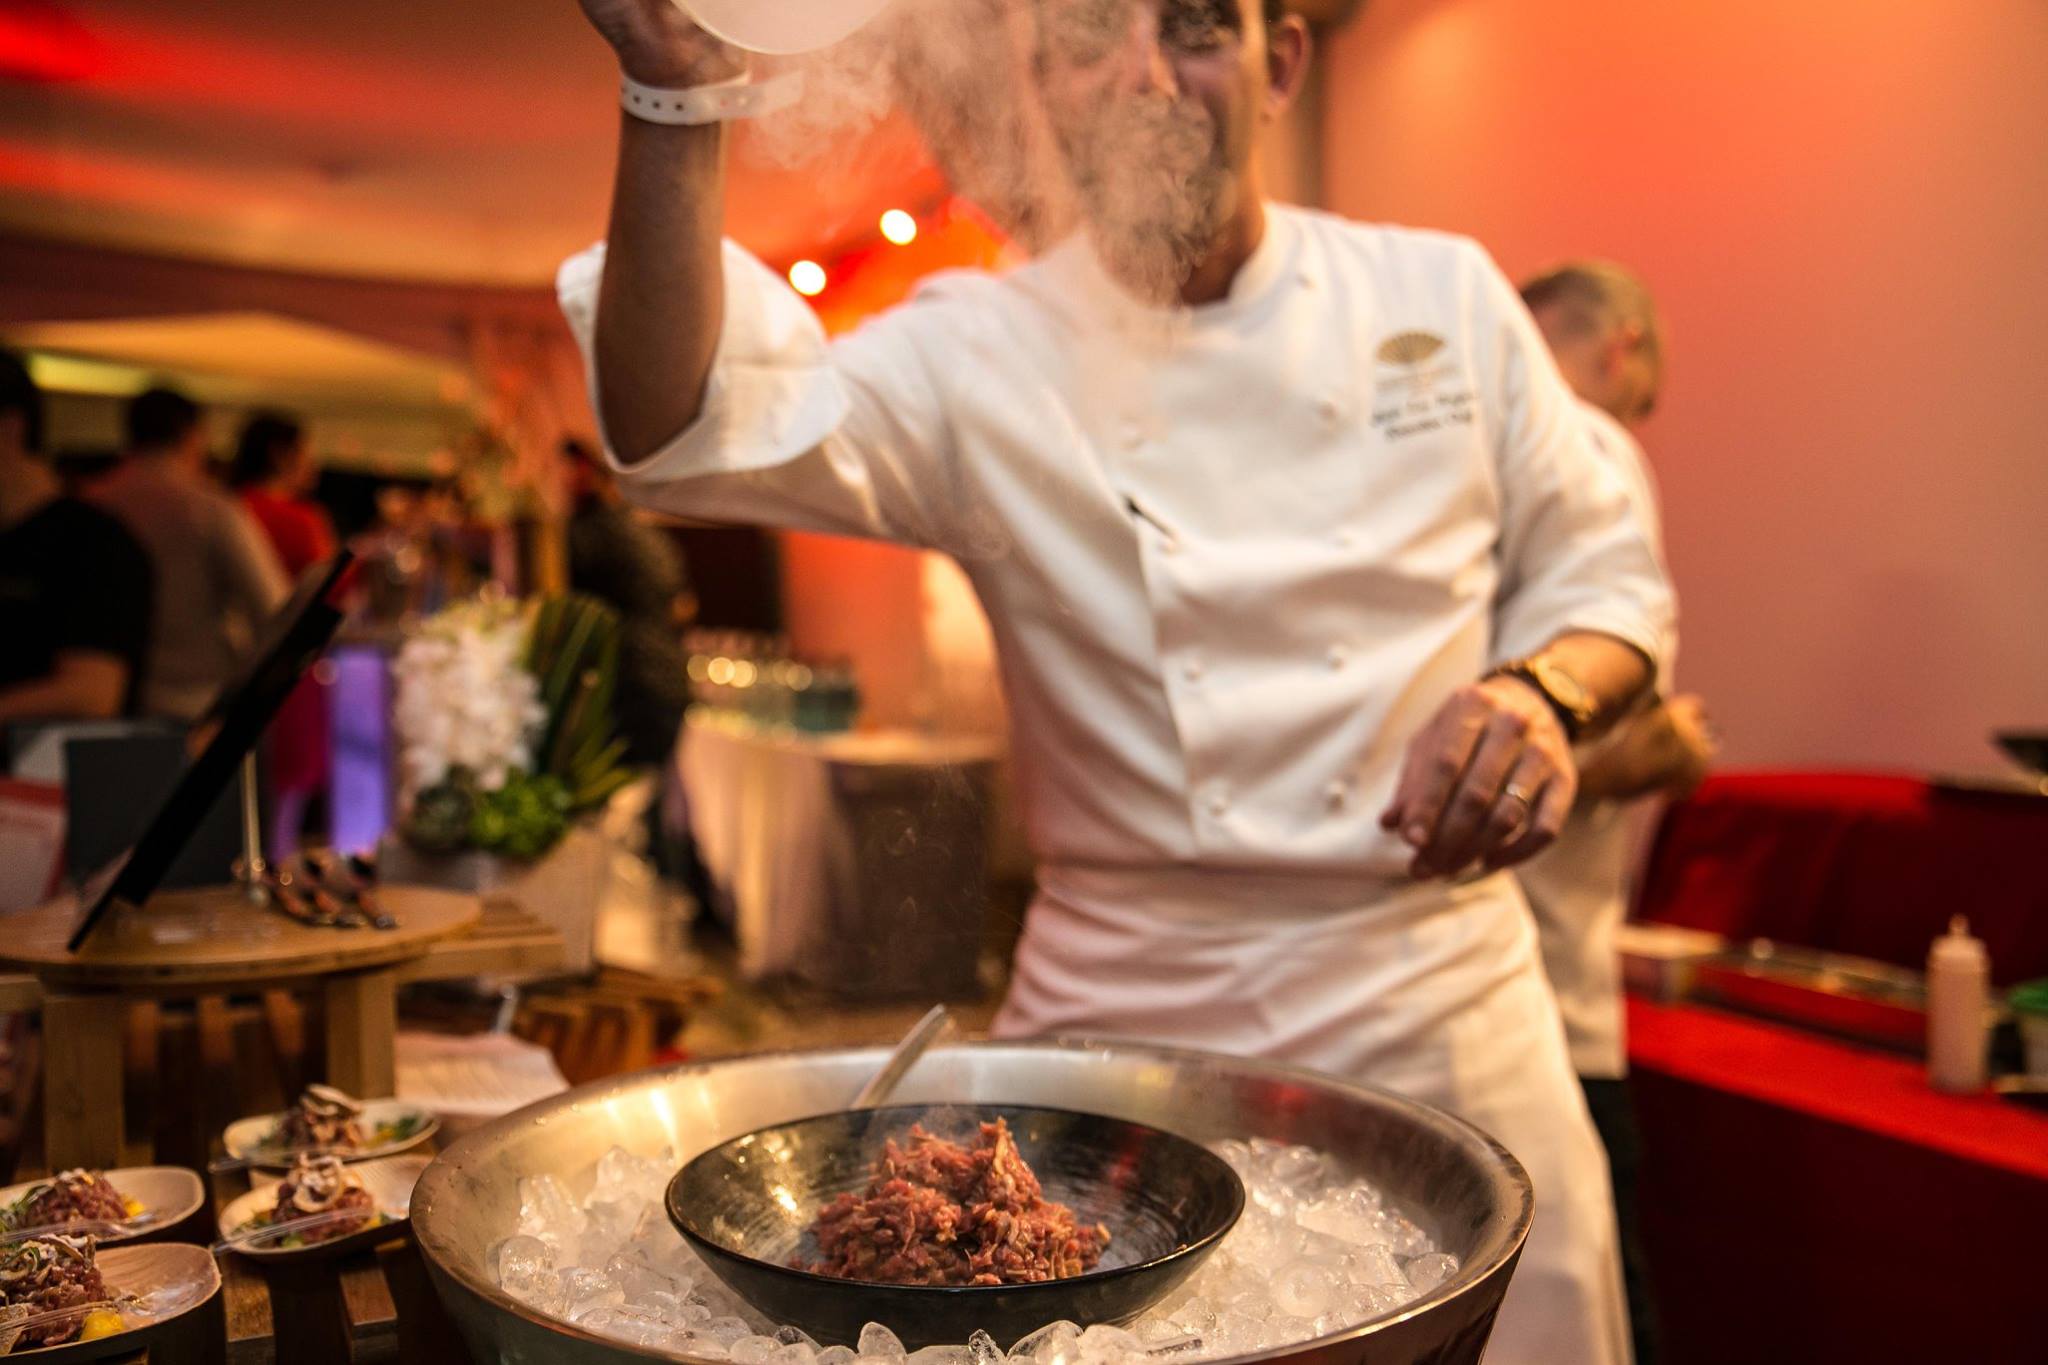 Miami’s 7th Annual LUCKYRICE Grand Feast hosted by Chef Paul Qui and Bombay Sapphire EAST Gin